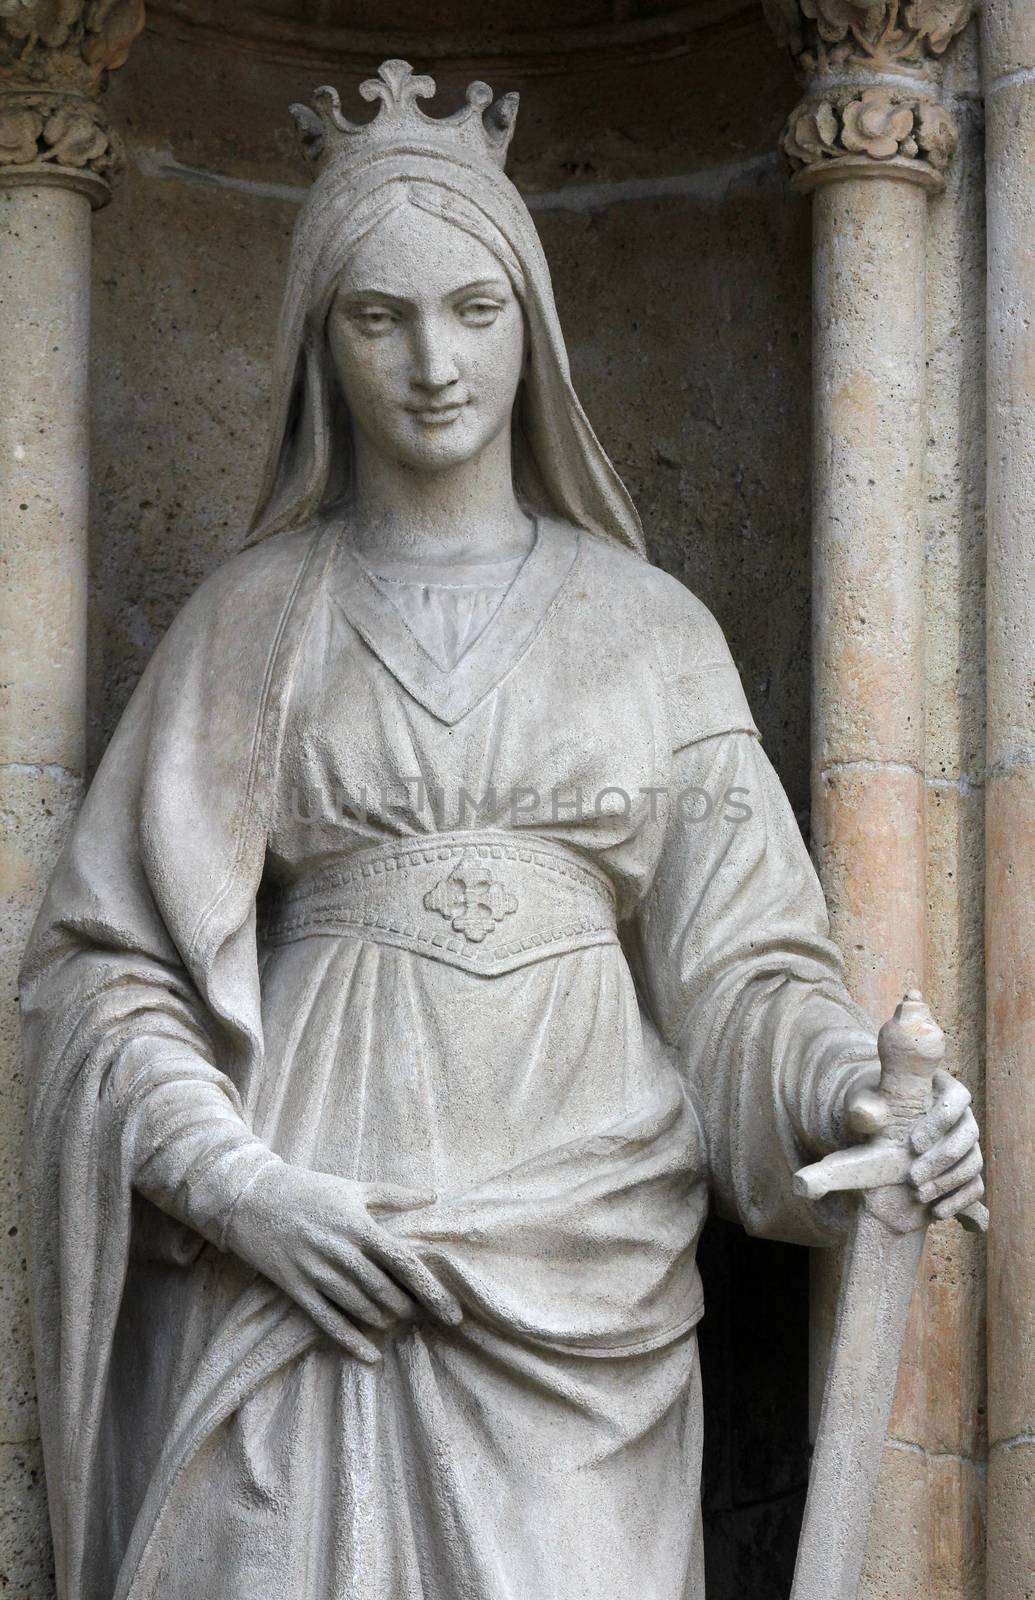 Statue of Saint Catherine on the portal of the cathedral dedicated to the Assumption of Mary in Zagreb